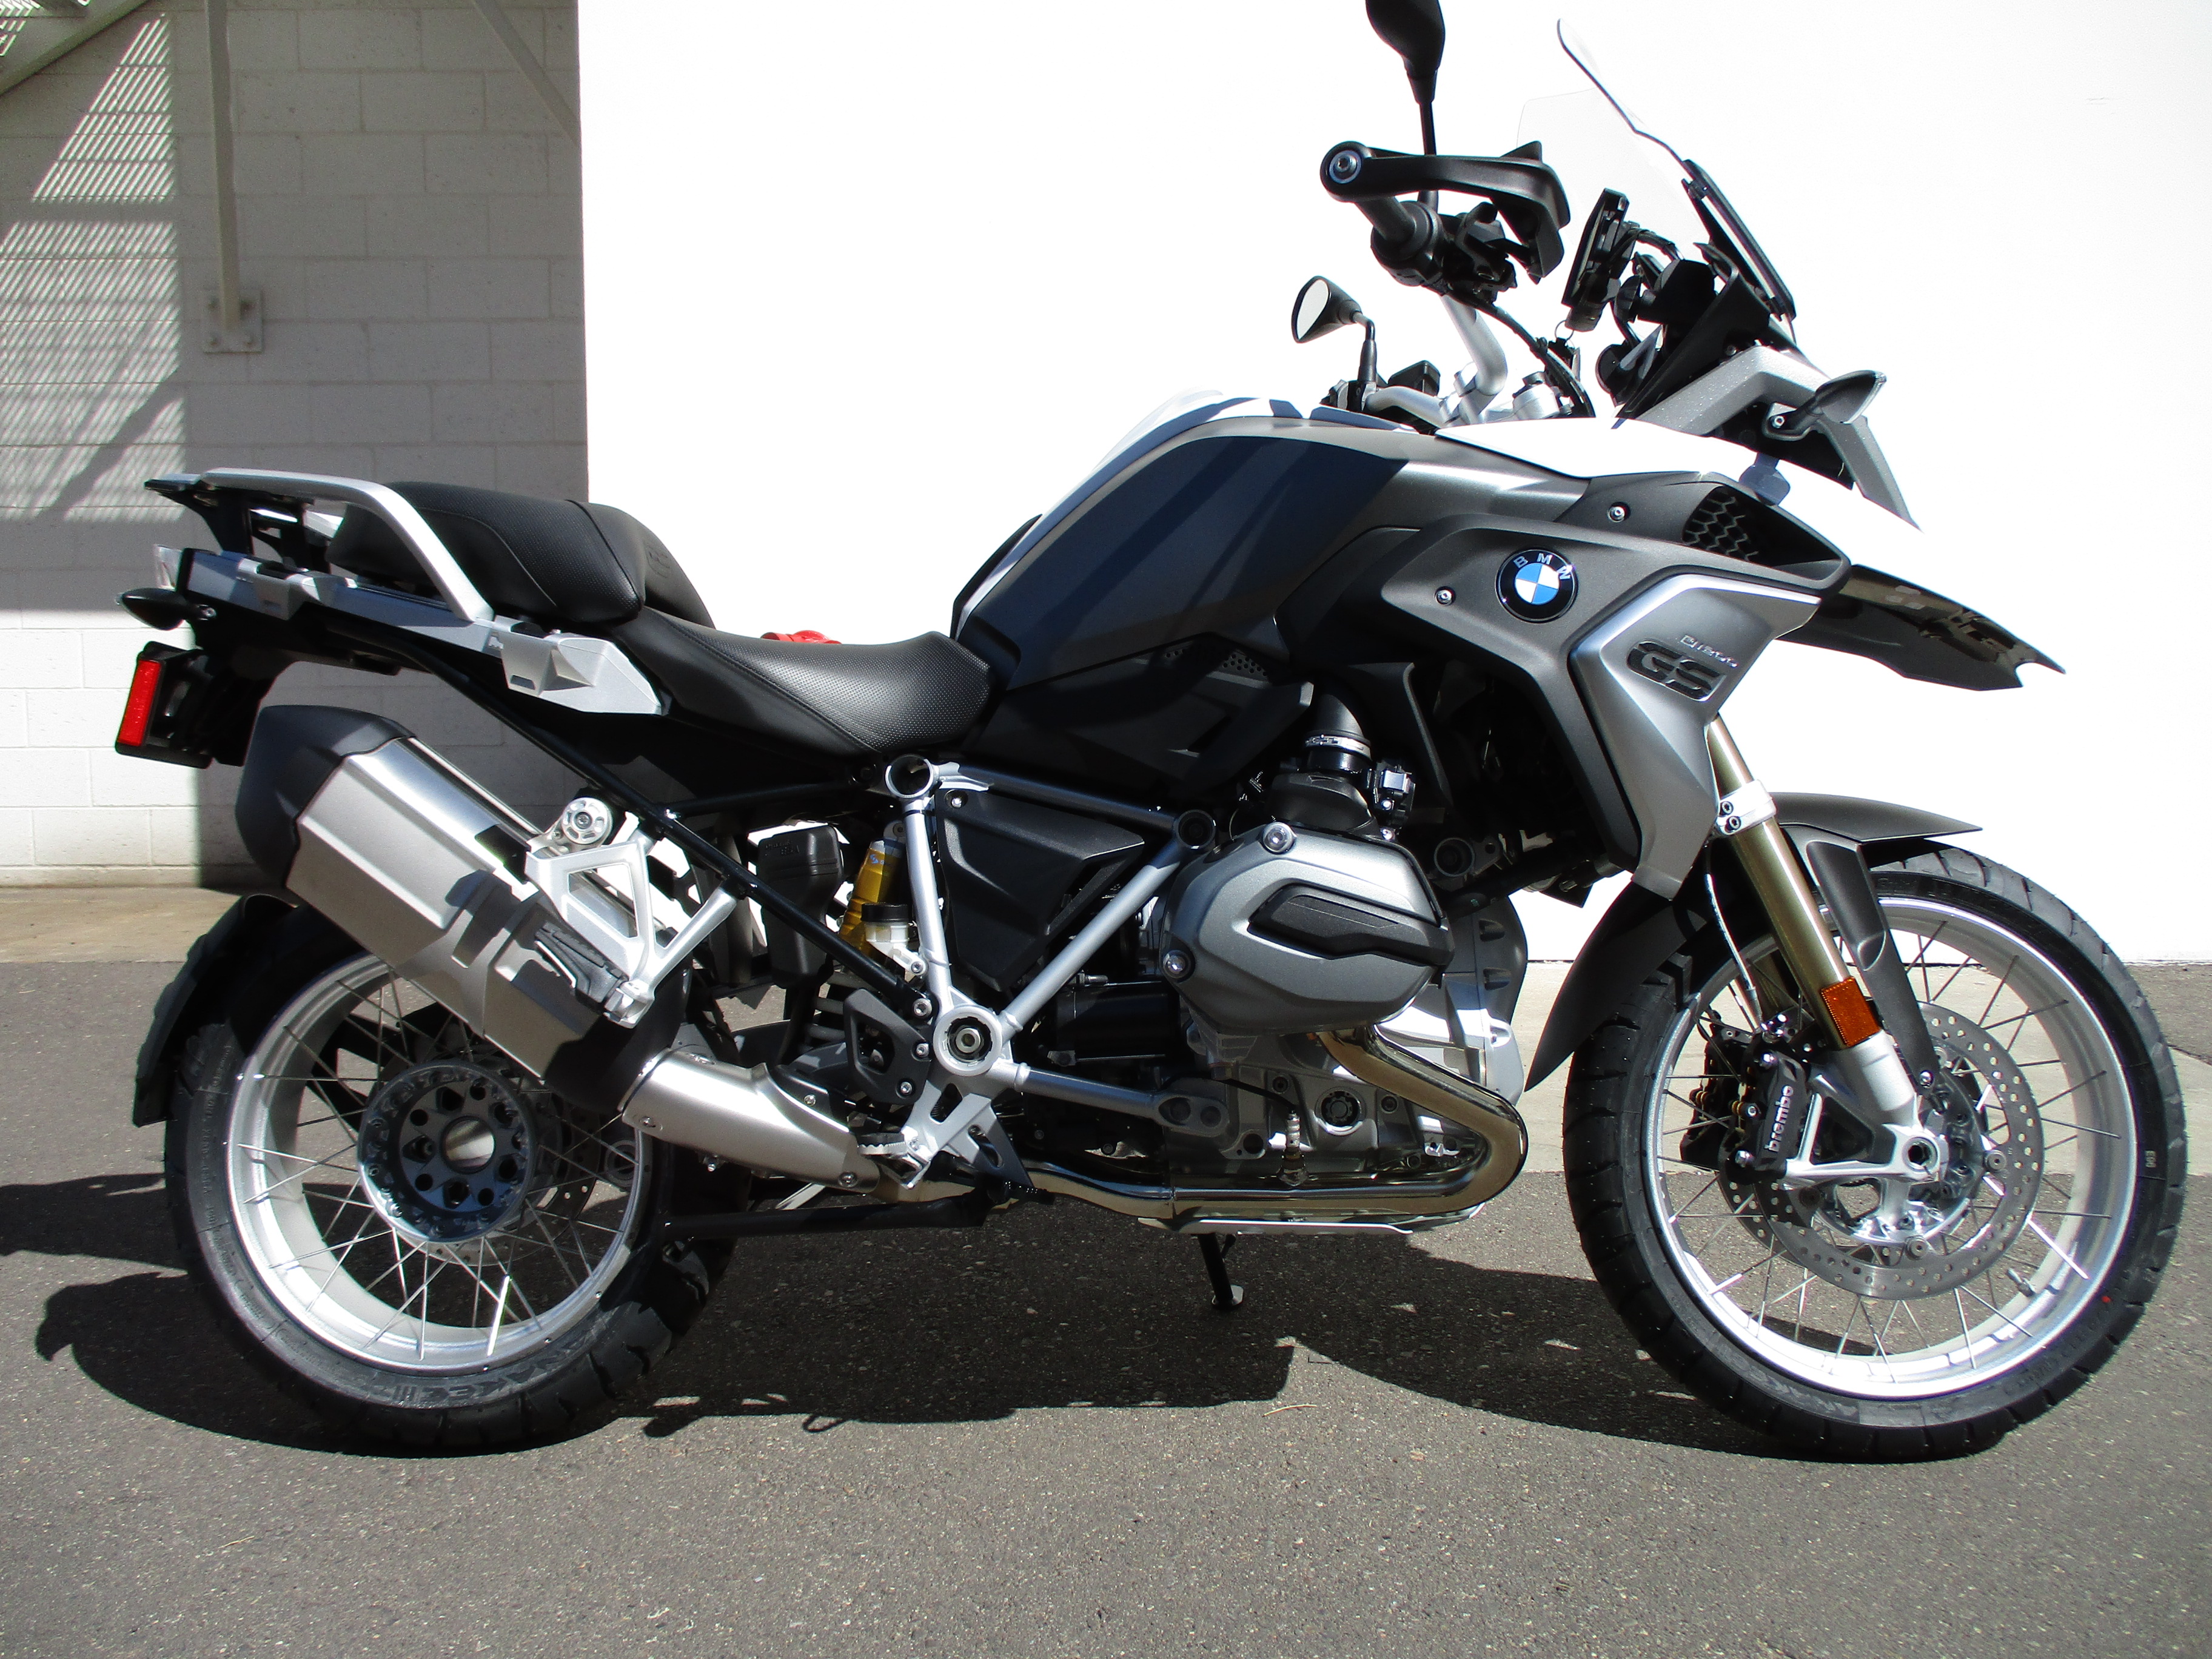 New Motorcycle Inventory - R1200GS - Sandia BMW Motorcycles - Albuquerque, NM.